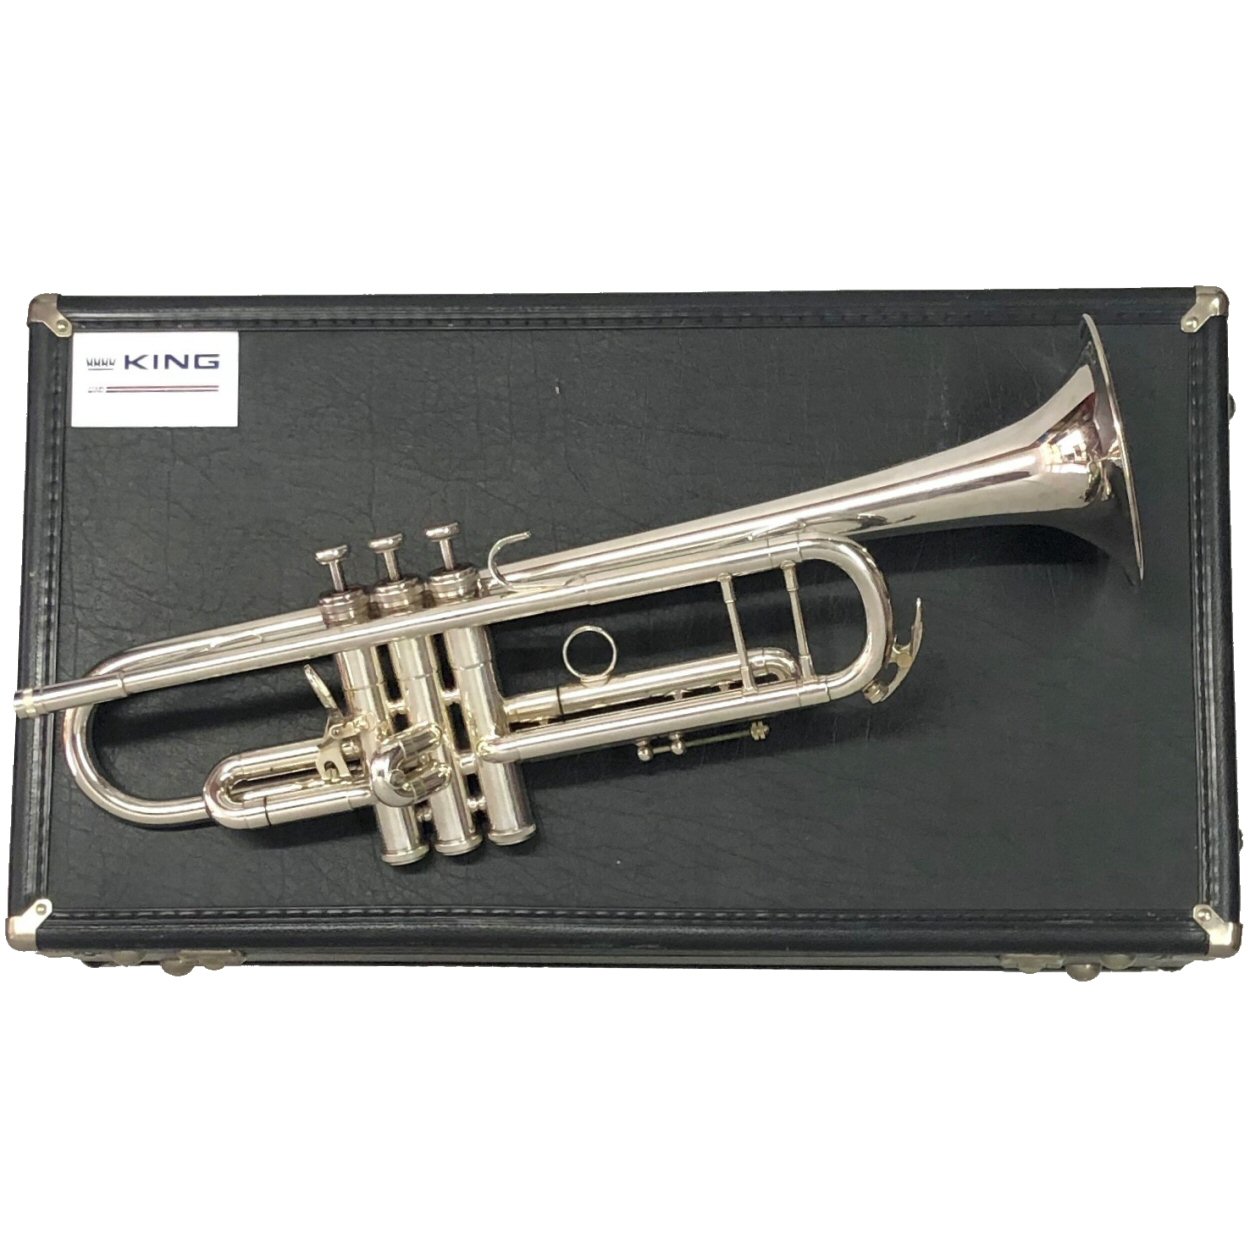 second-hand-king-silver-flair-trumpet-silver-plated-good-condition-2055t